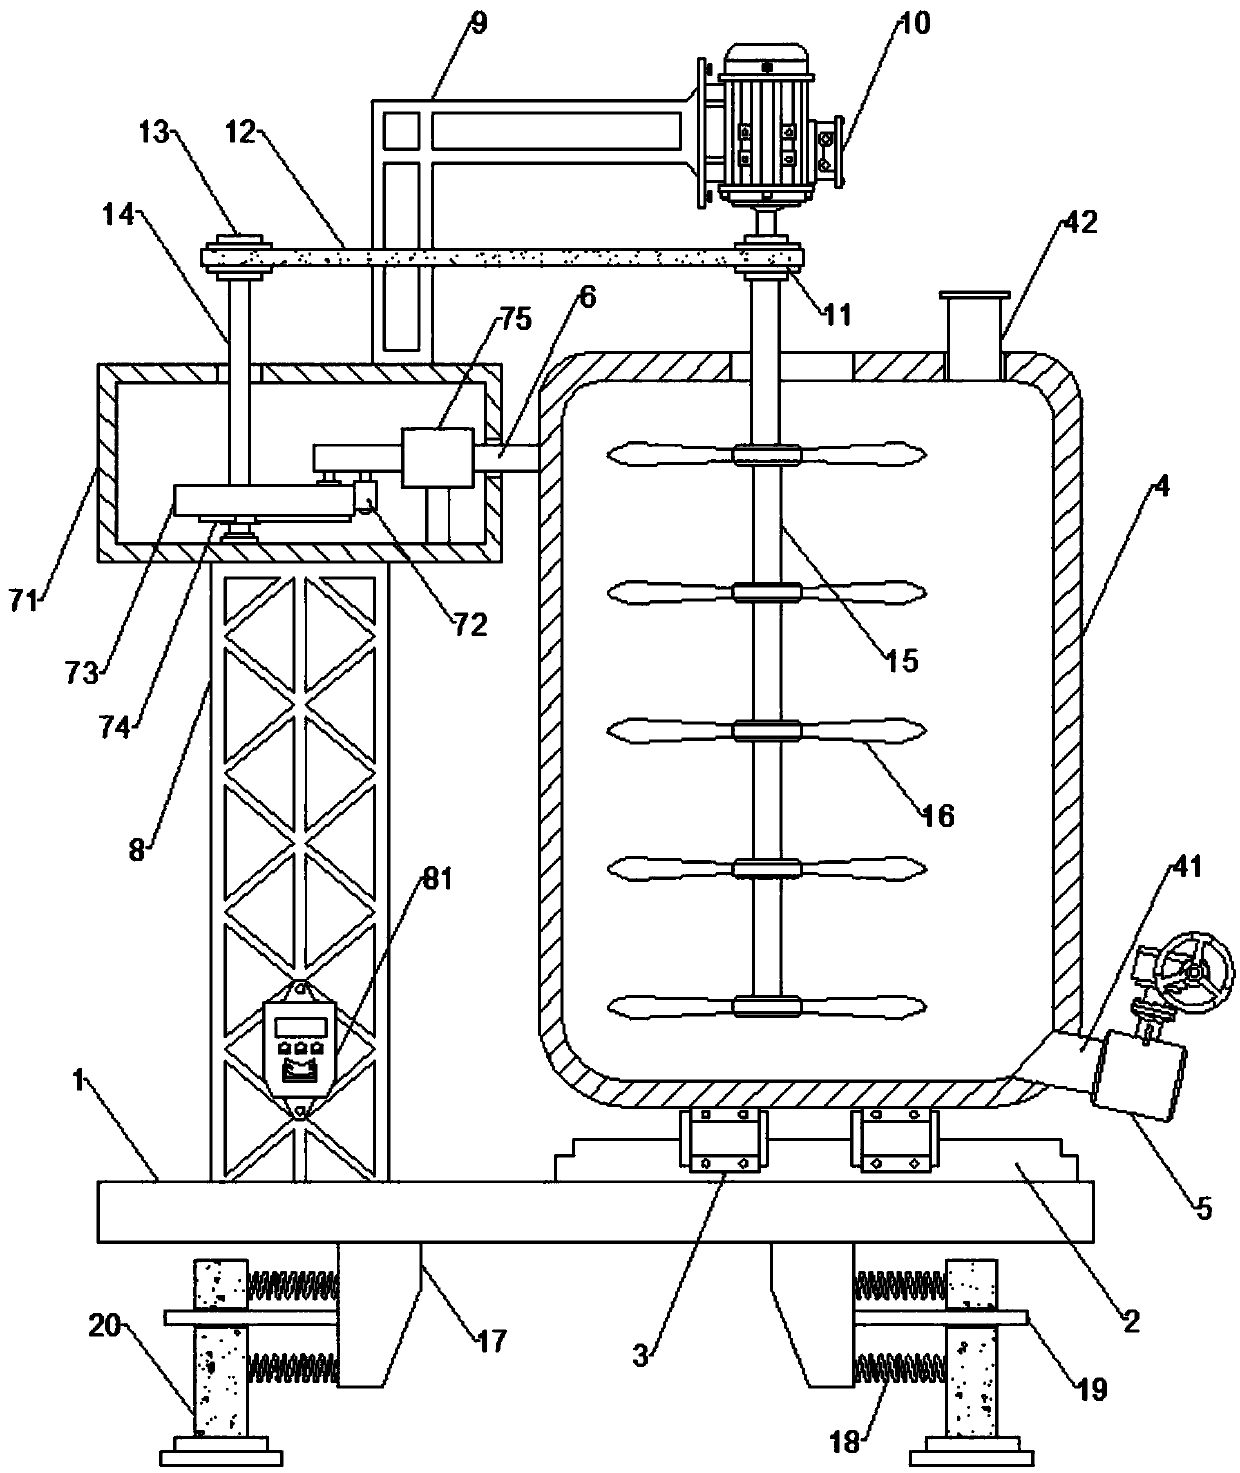 Vertical linkage chemical reaction stirring and mixing kettle